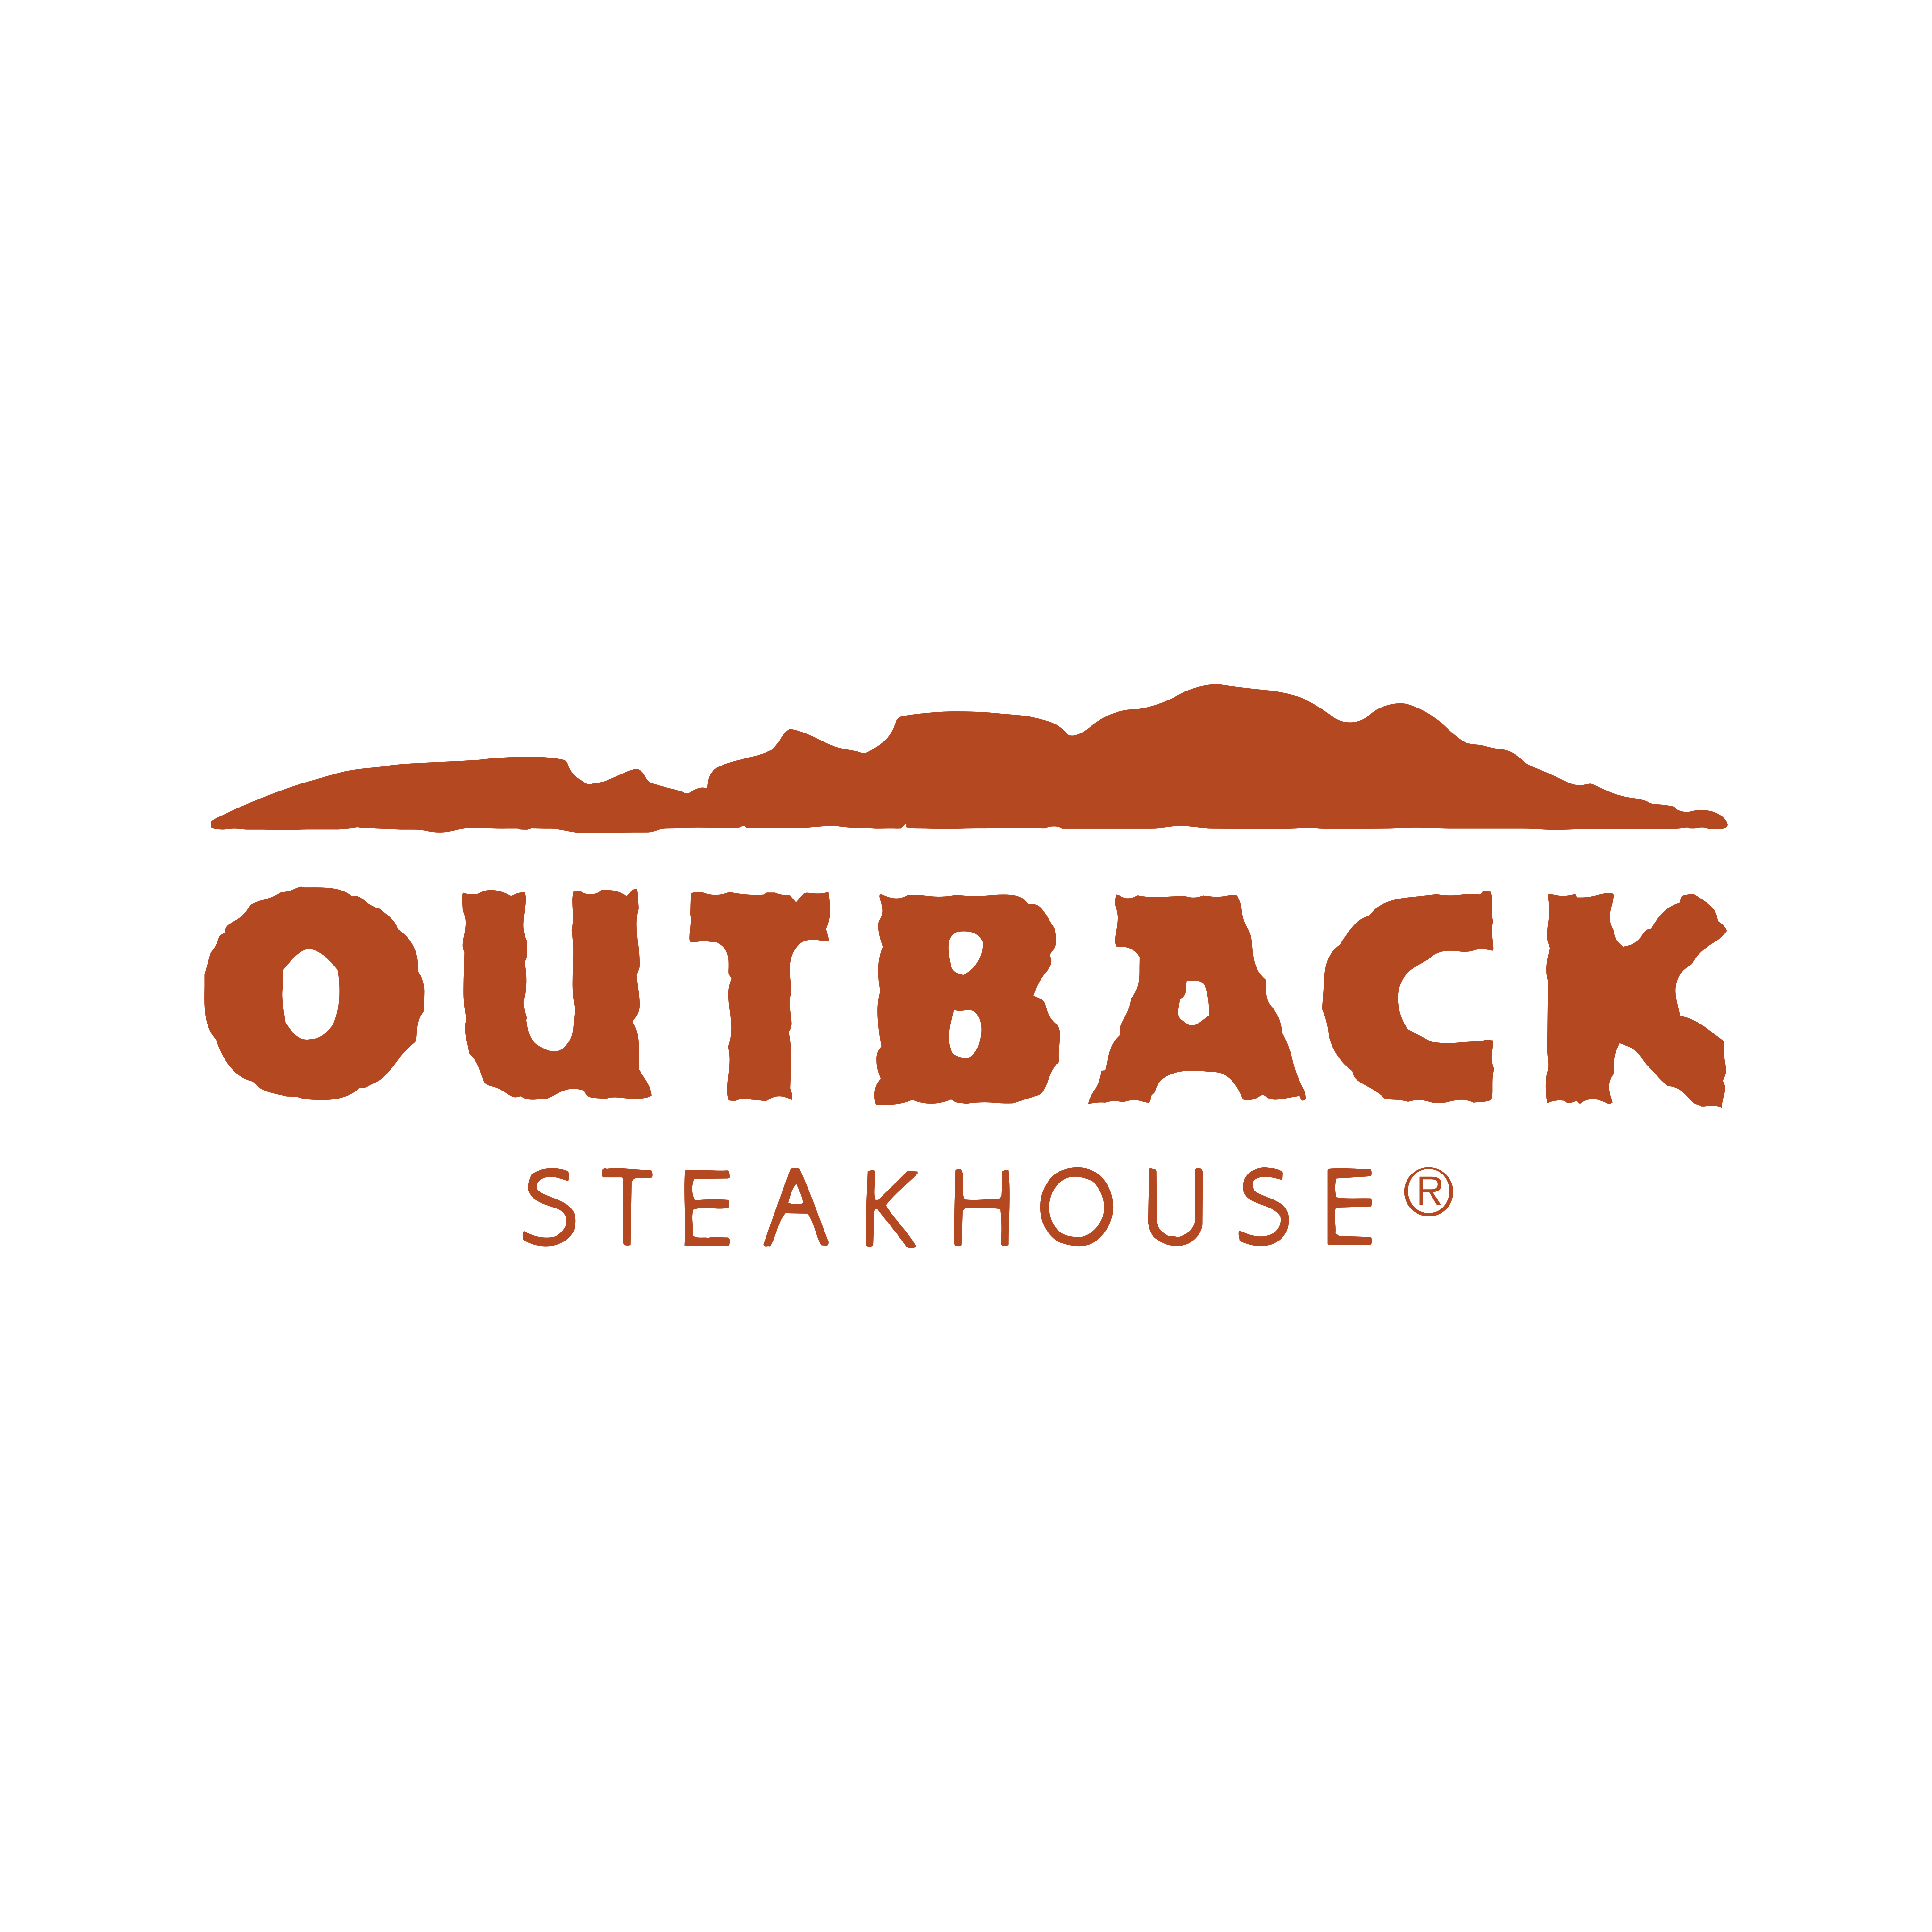 Outback Steakhouse Logo PNG.